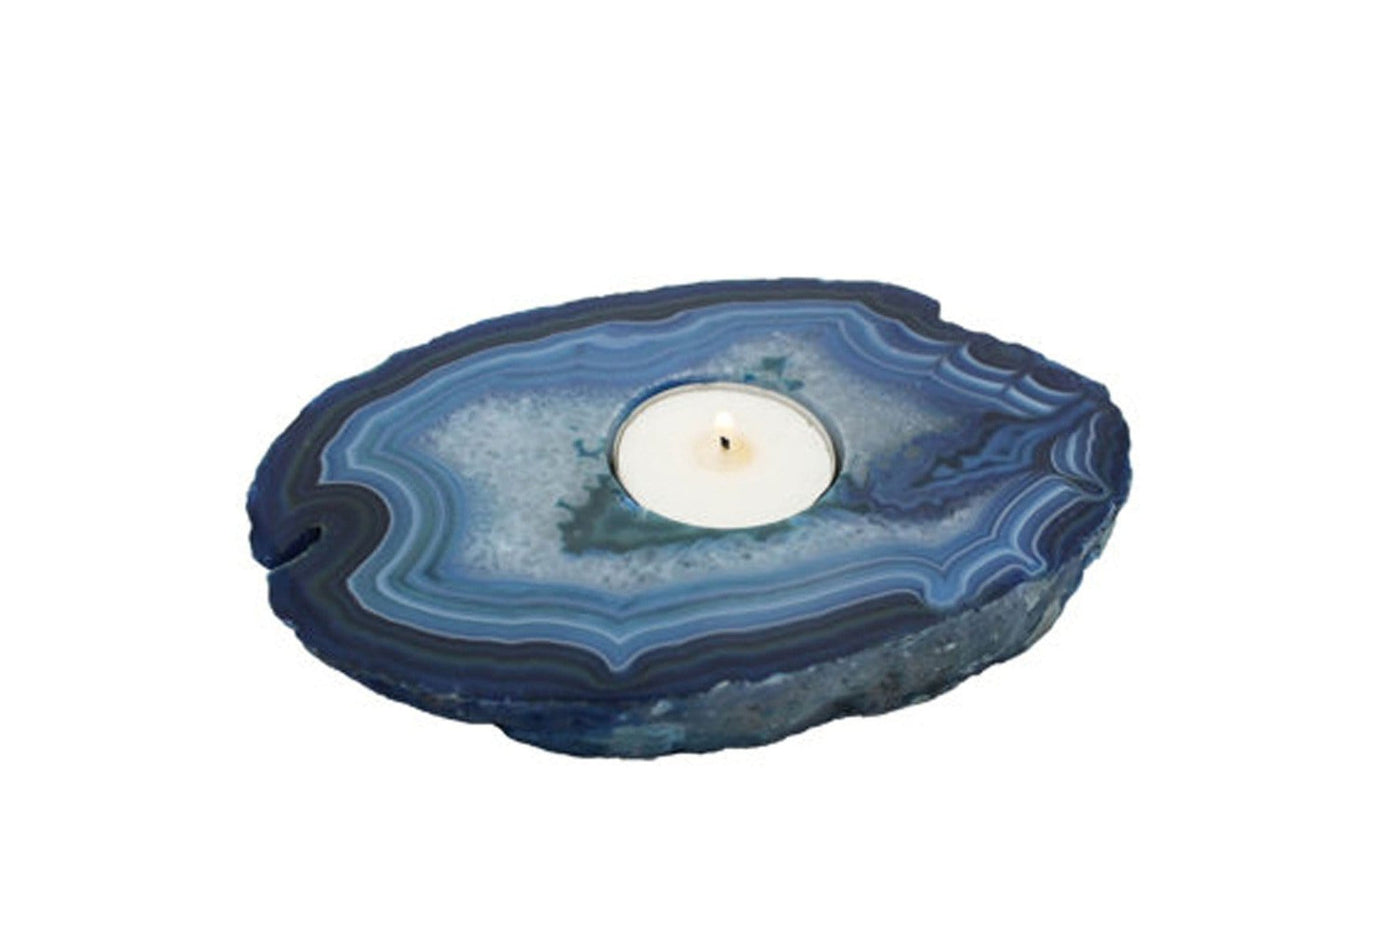 blue agate candle holder on white background